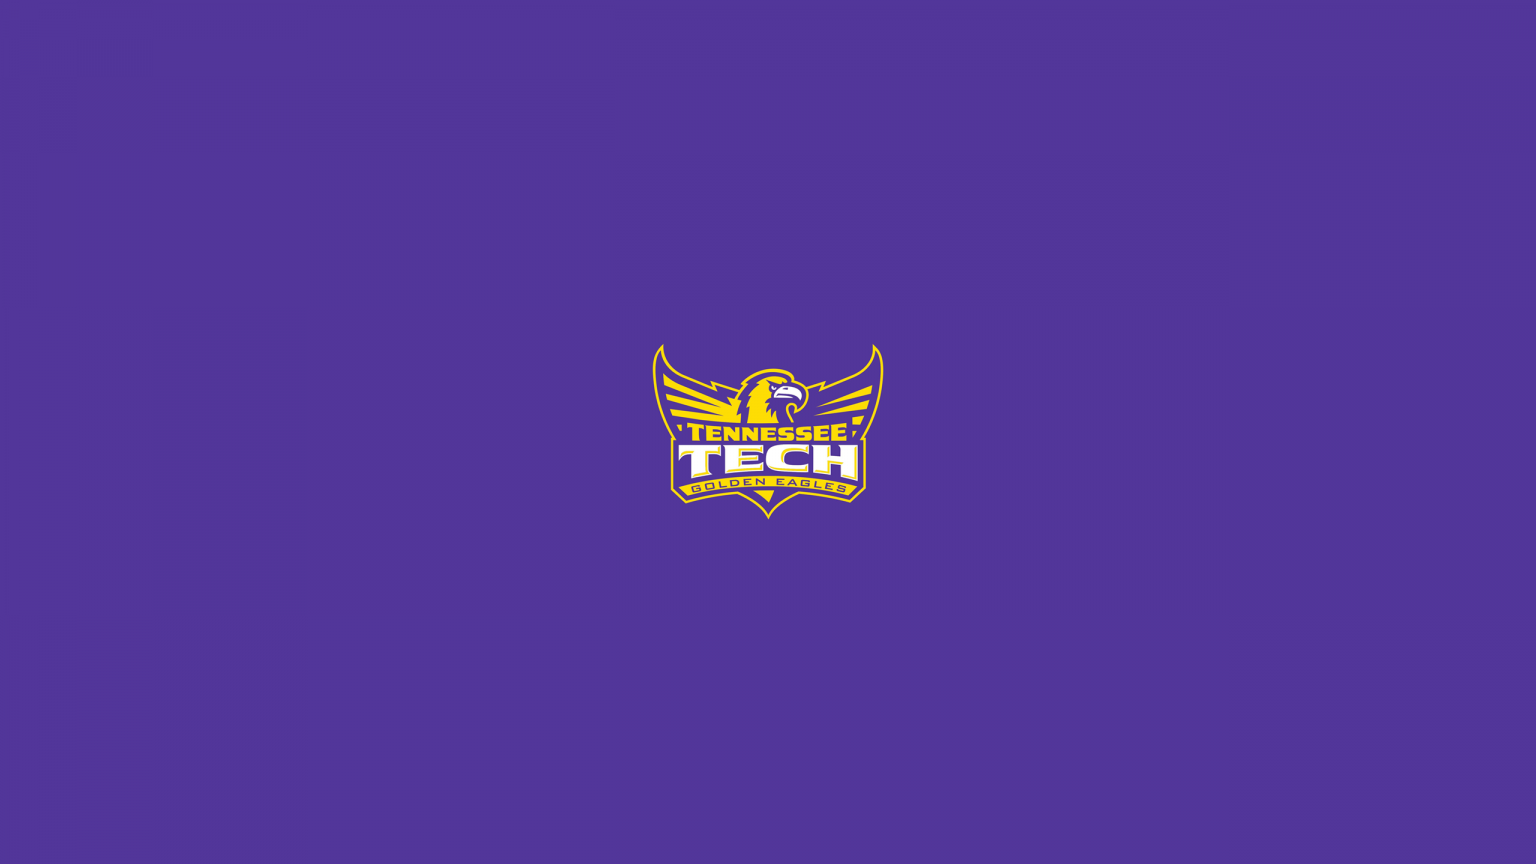 Tennessee Tech Golden Eagles Basketball - NCAAB - Square Bettor